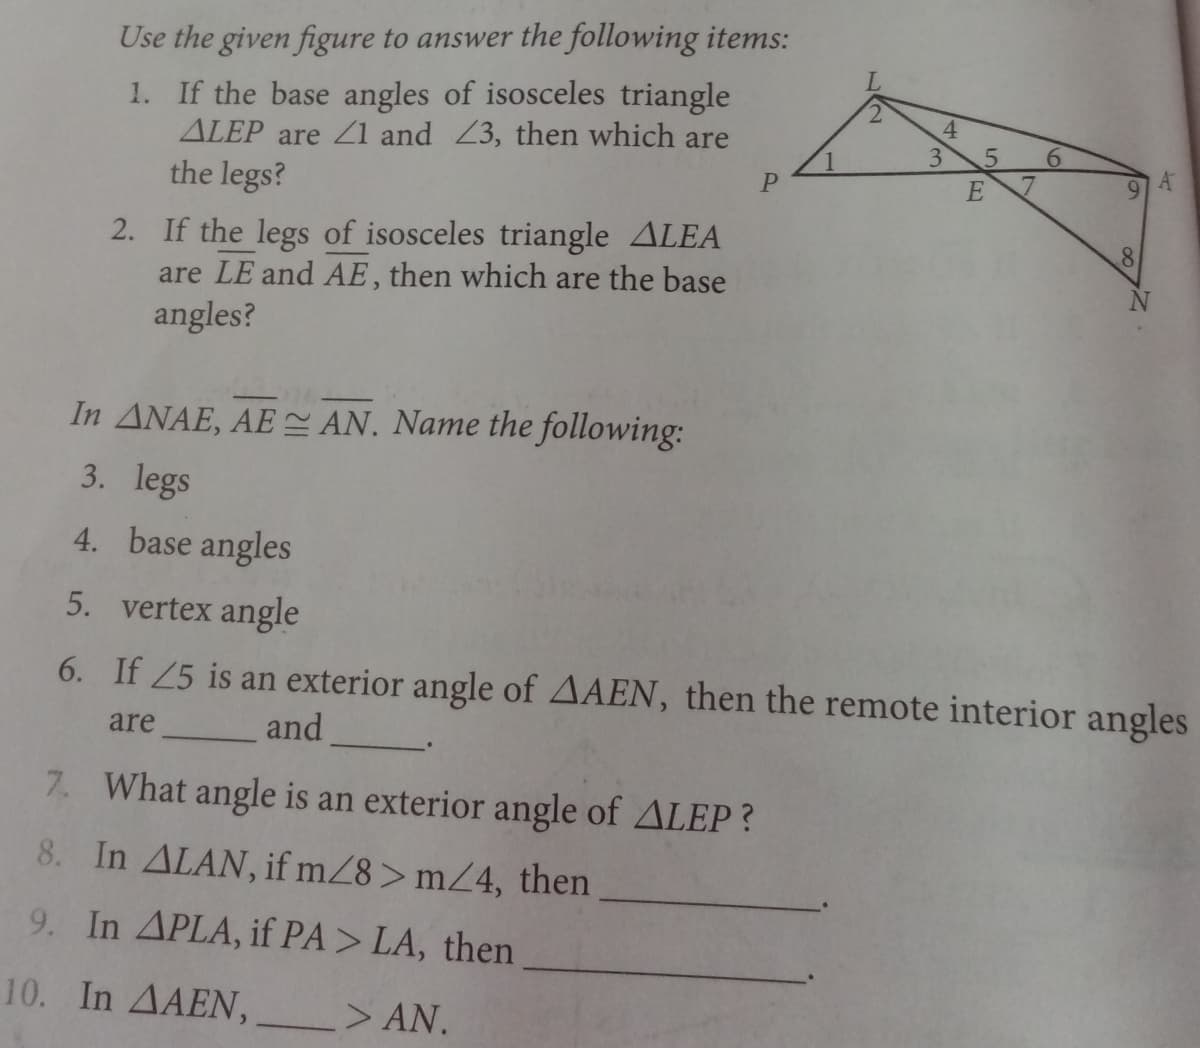 Use the given figure to answer the following items:
1. If the base angles of isosceles triangle
ALEP are 1 and Z3, then which are
the legs?
2.
4
3
6.
E
2. If the legs of isosceles triangle ALEA
are LE and AE, then which are the base
angles?
In ANAE, AE AN. Name the following:
3. legs
4. base angles
5. vertex angle
6. If 25 is an exterior angle of AAEN, then the remote interior angles
are
and
7. What angle is an exterior angle of ALEP?
8. In ALAN, if mZ8> mZ4, then
9. In APLA, if PA> LA, then
10. In AAEN,
> AN.
